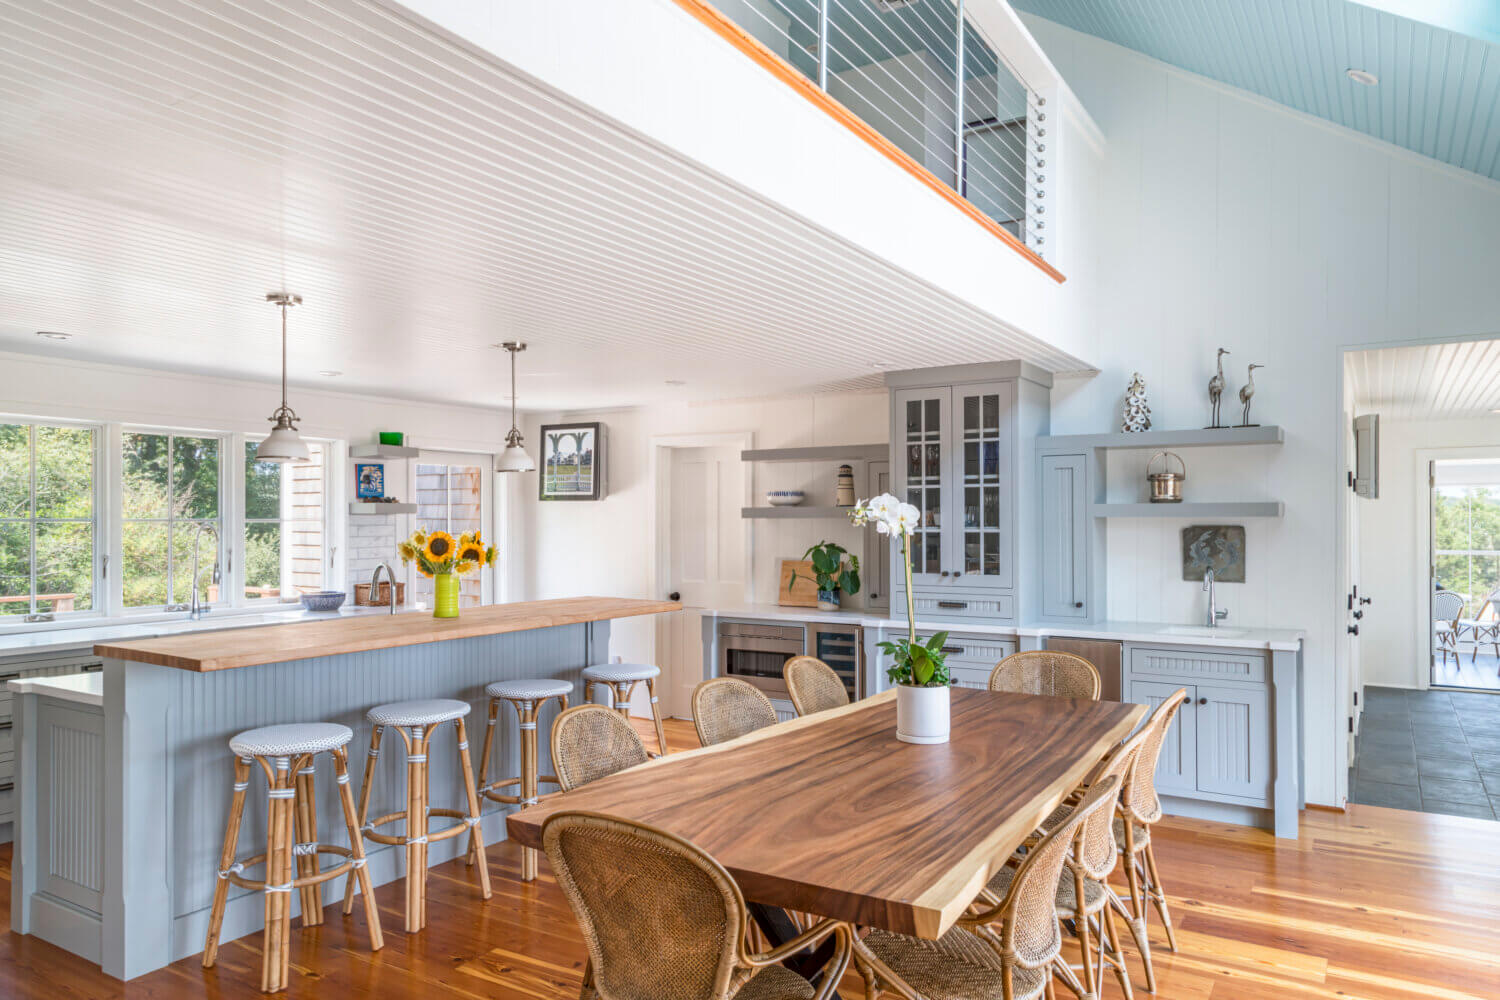 A cottage style kitchen with light gray inset cabinets has lots of seating for entertaining with the peninsula and dining room table side by side.